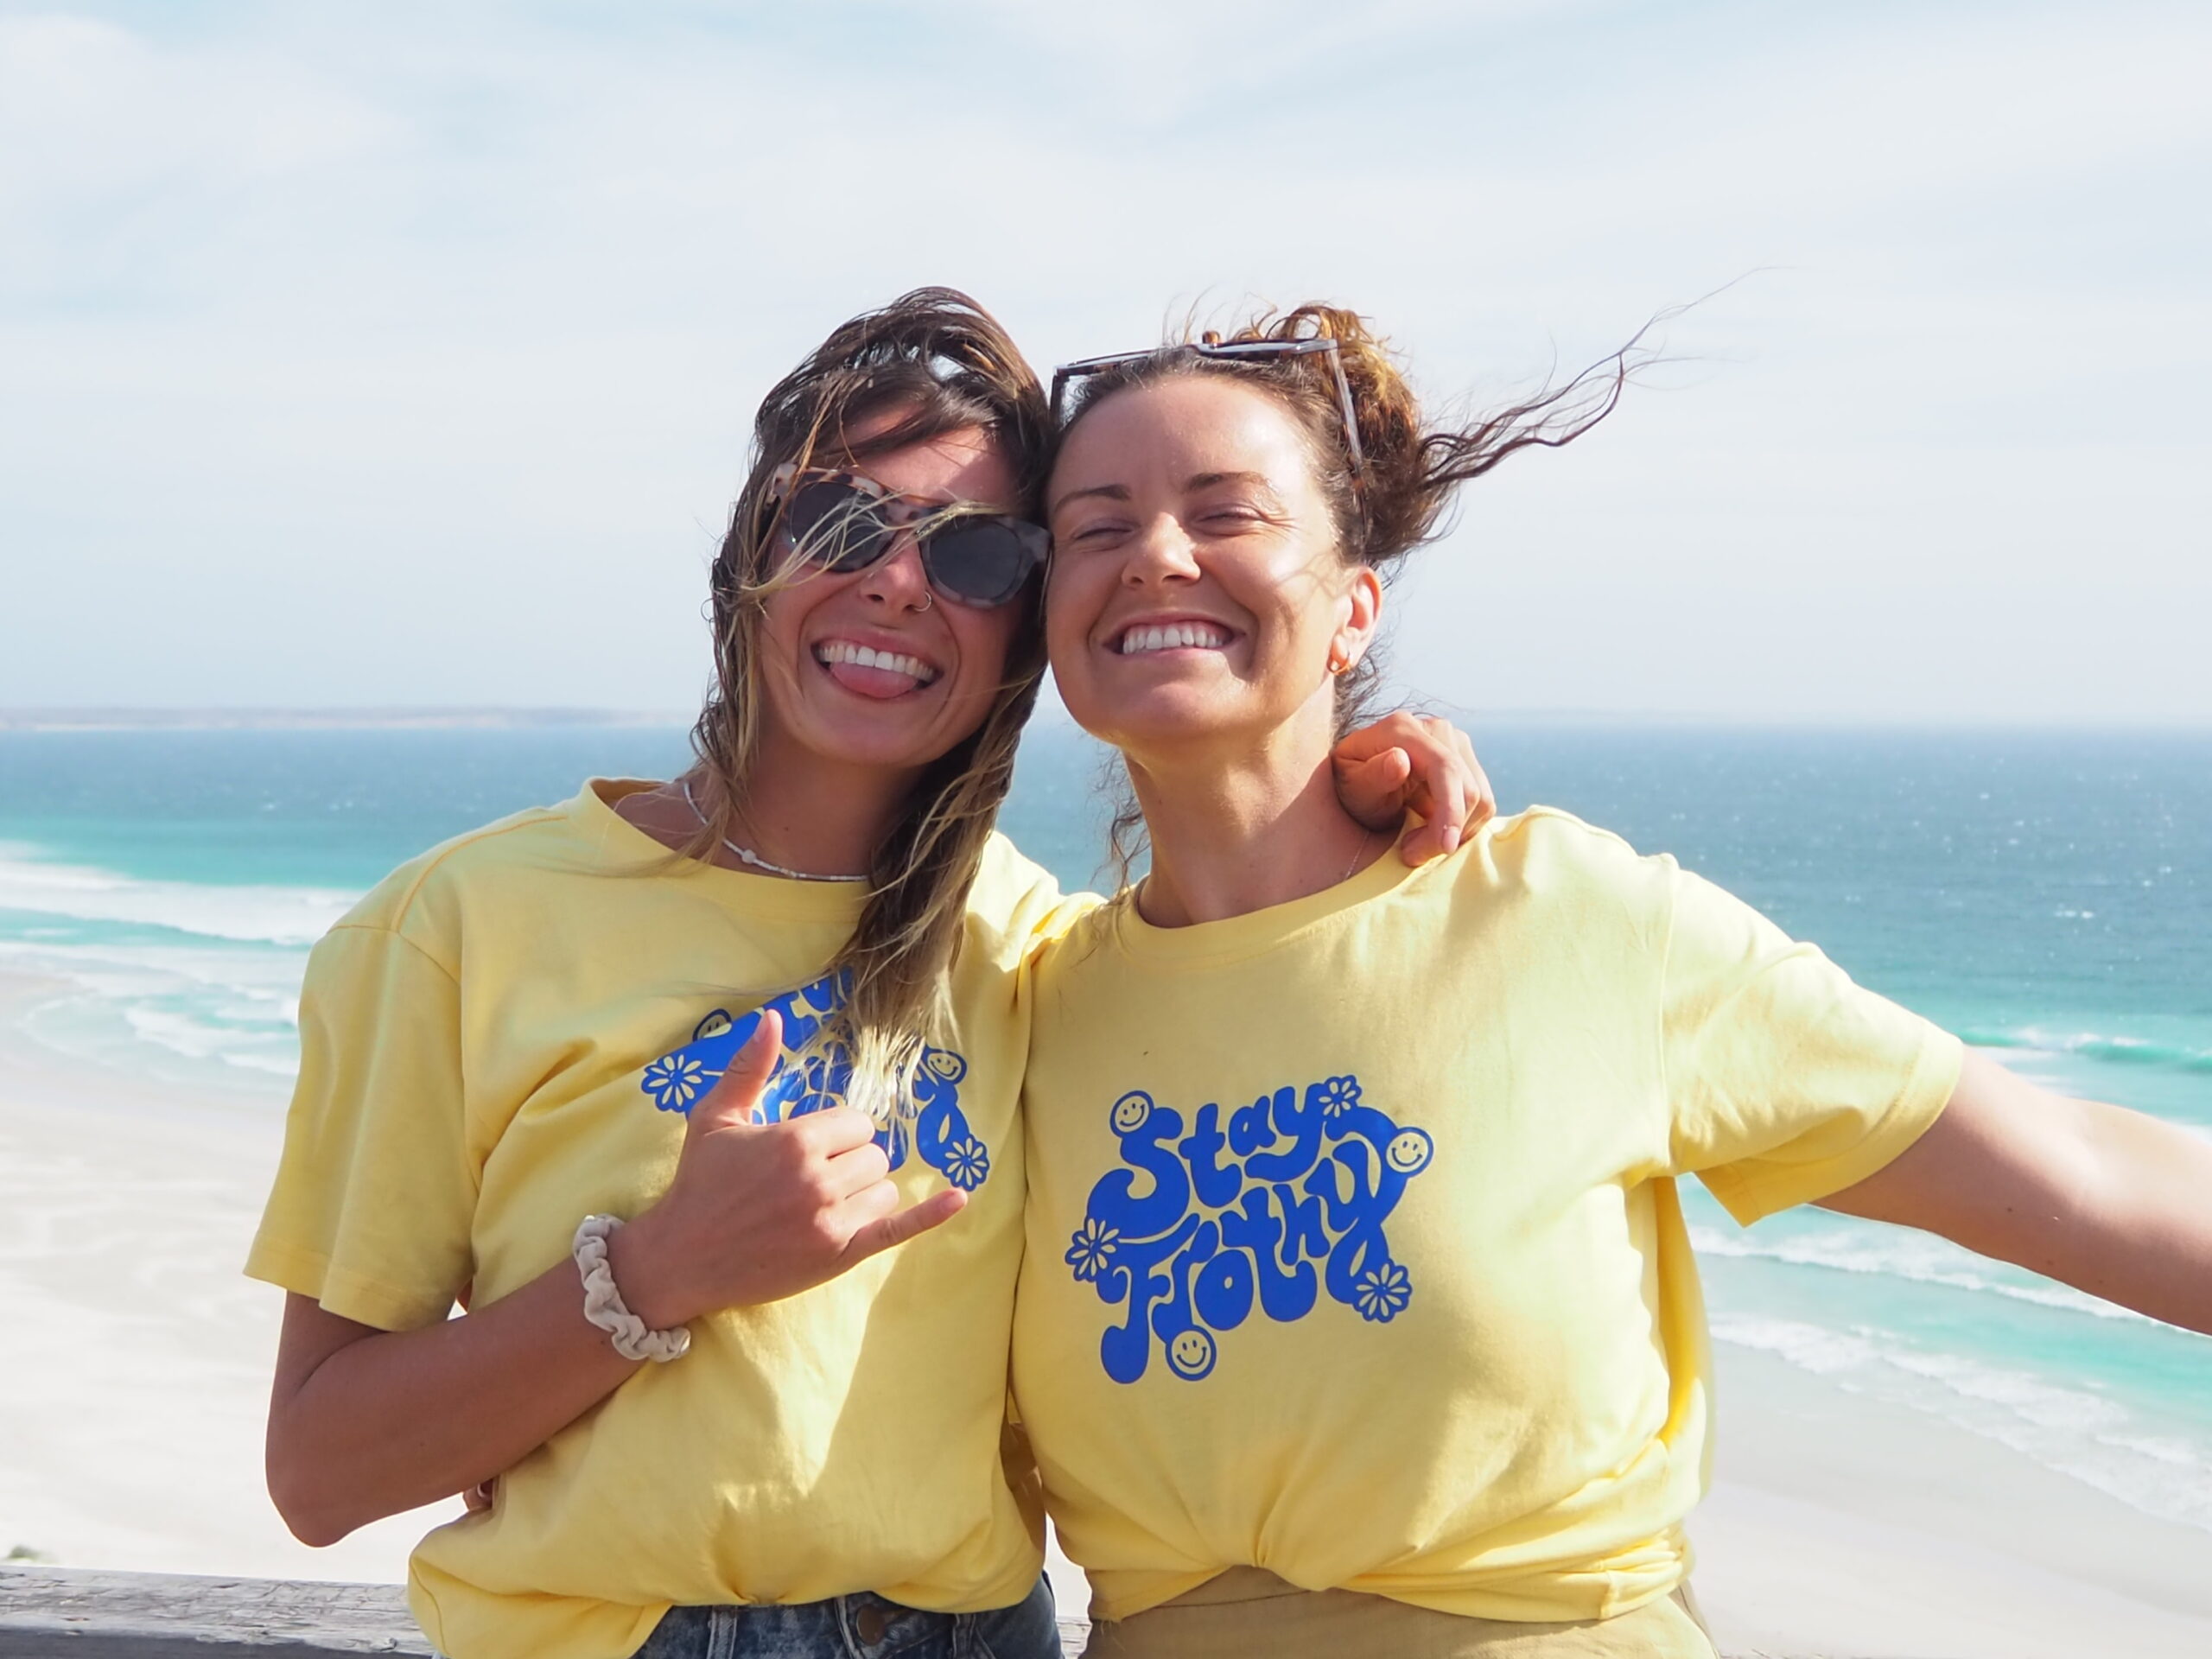 The Savvy Swags x Enliven Surf Camp